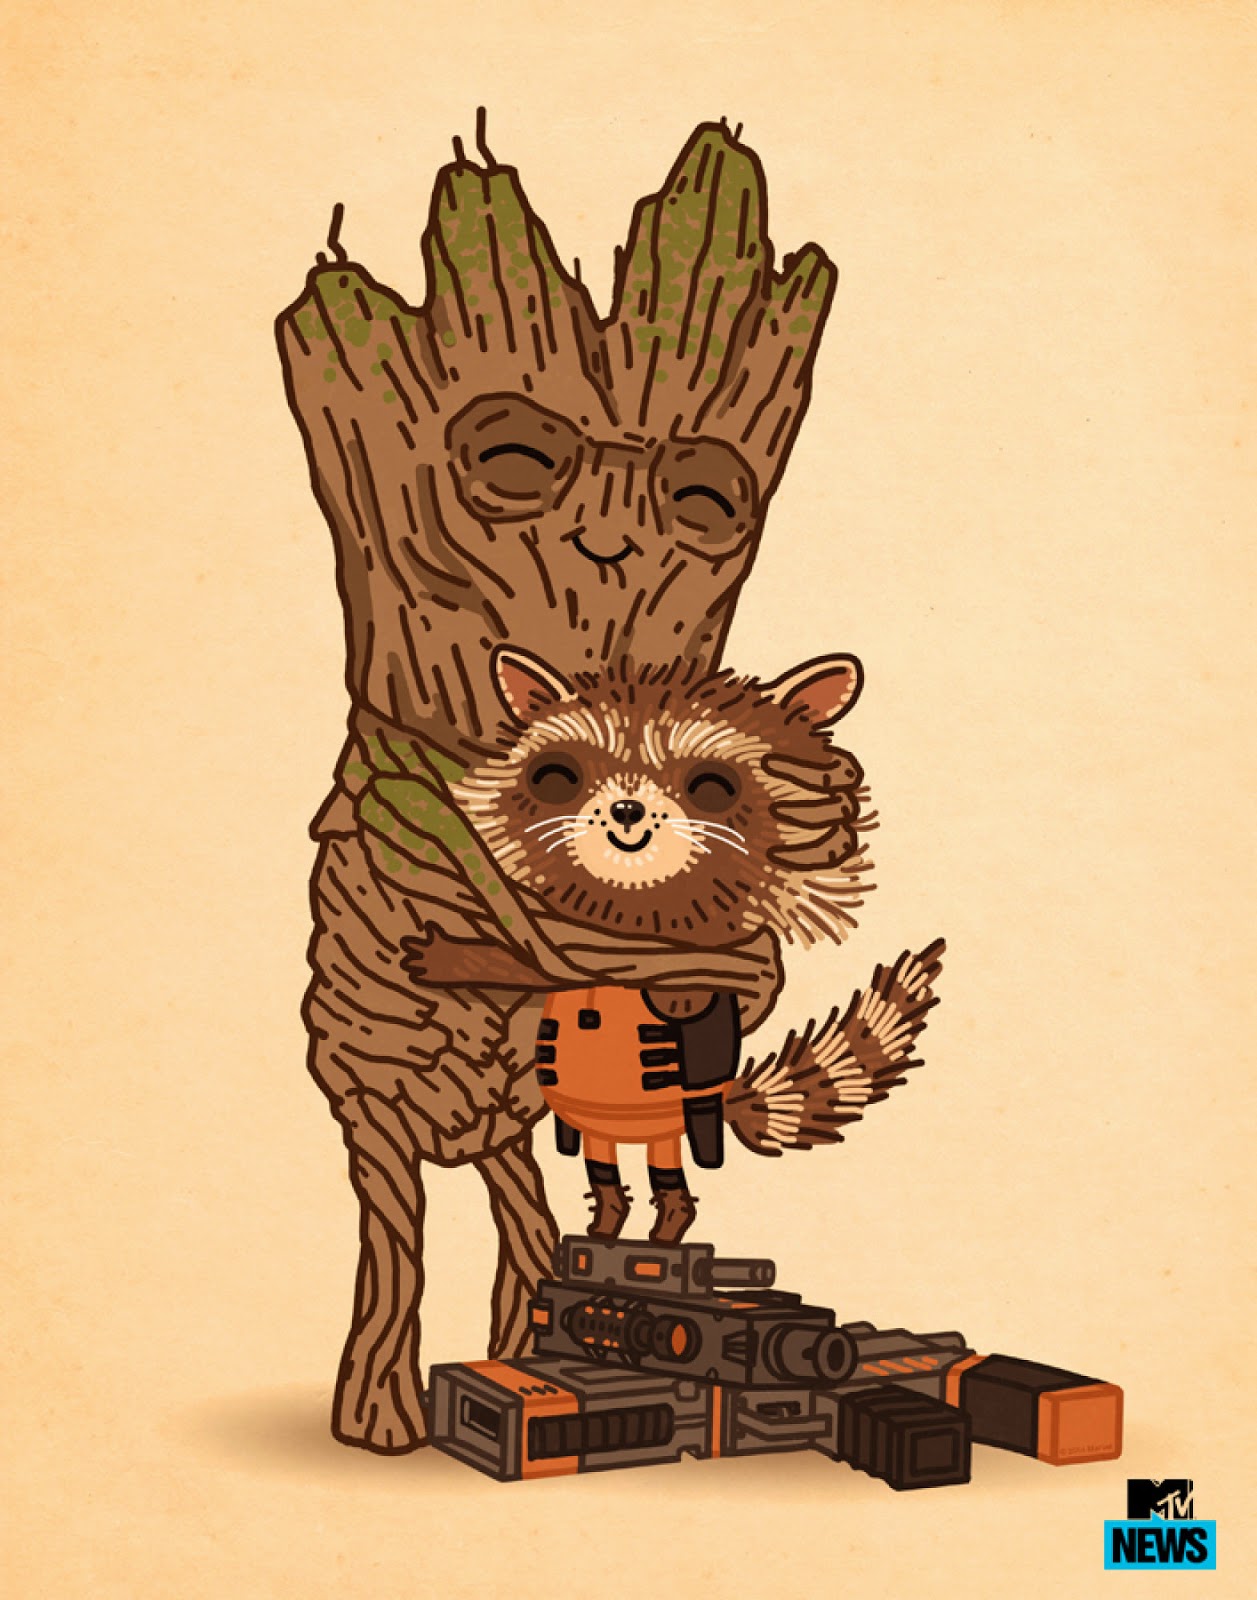 San Diego Comic-Con 2014 Exclusive Guardians of the Galaxy Rocket Raccoon & Groot “Tree Hugger” Print by Mike Mitchell